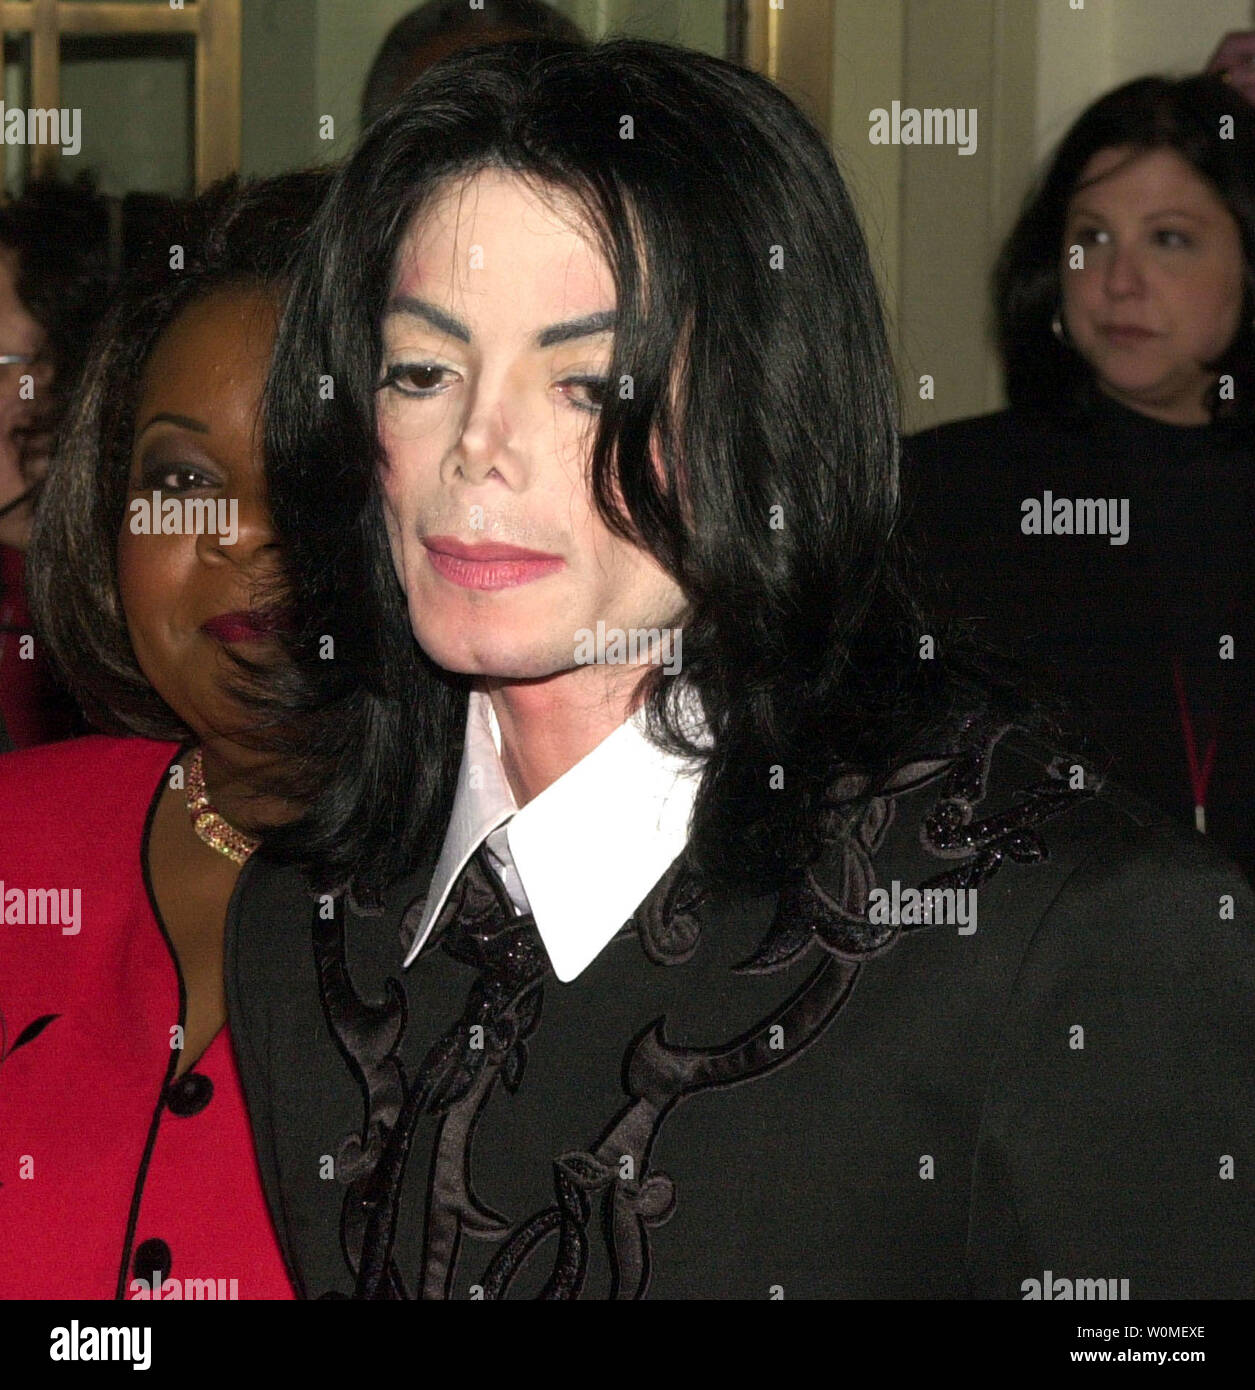 michael-jackson-the-king-of-pop-seen-in-a-february-14-2001-file-photo-in-new-york-died-from-a-heart-attack-in-los-angeles-on-june-25-2009-he-was-50-years-old-upi-photoezio-petersenfile-W0MEXE.jpg